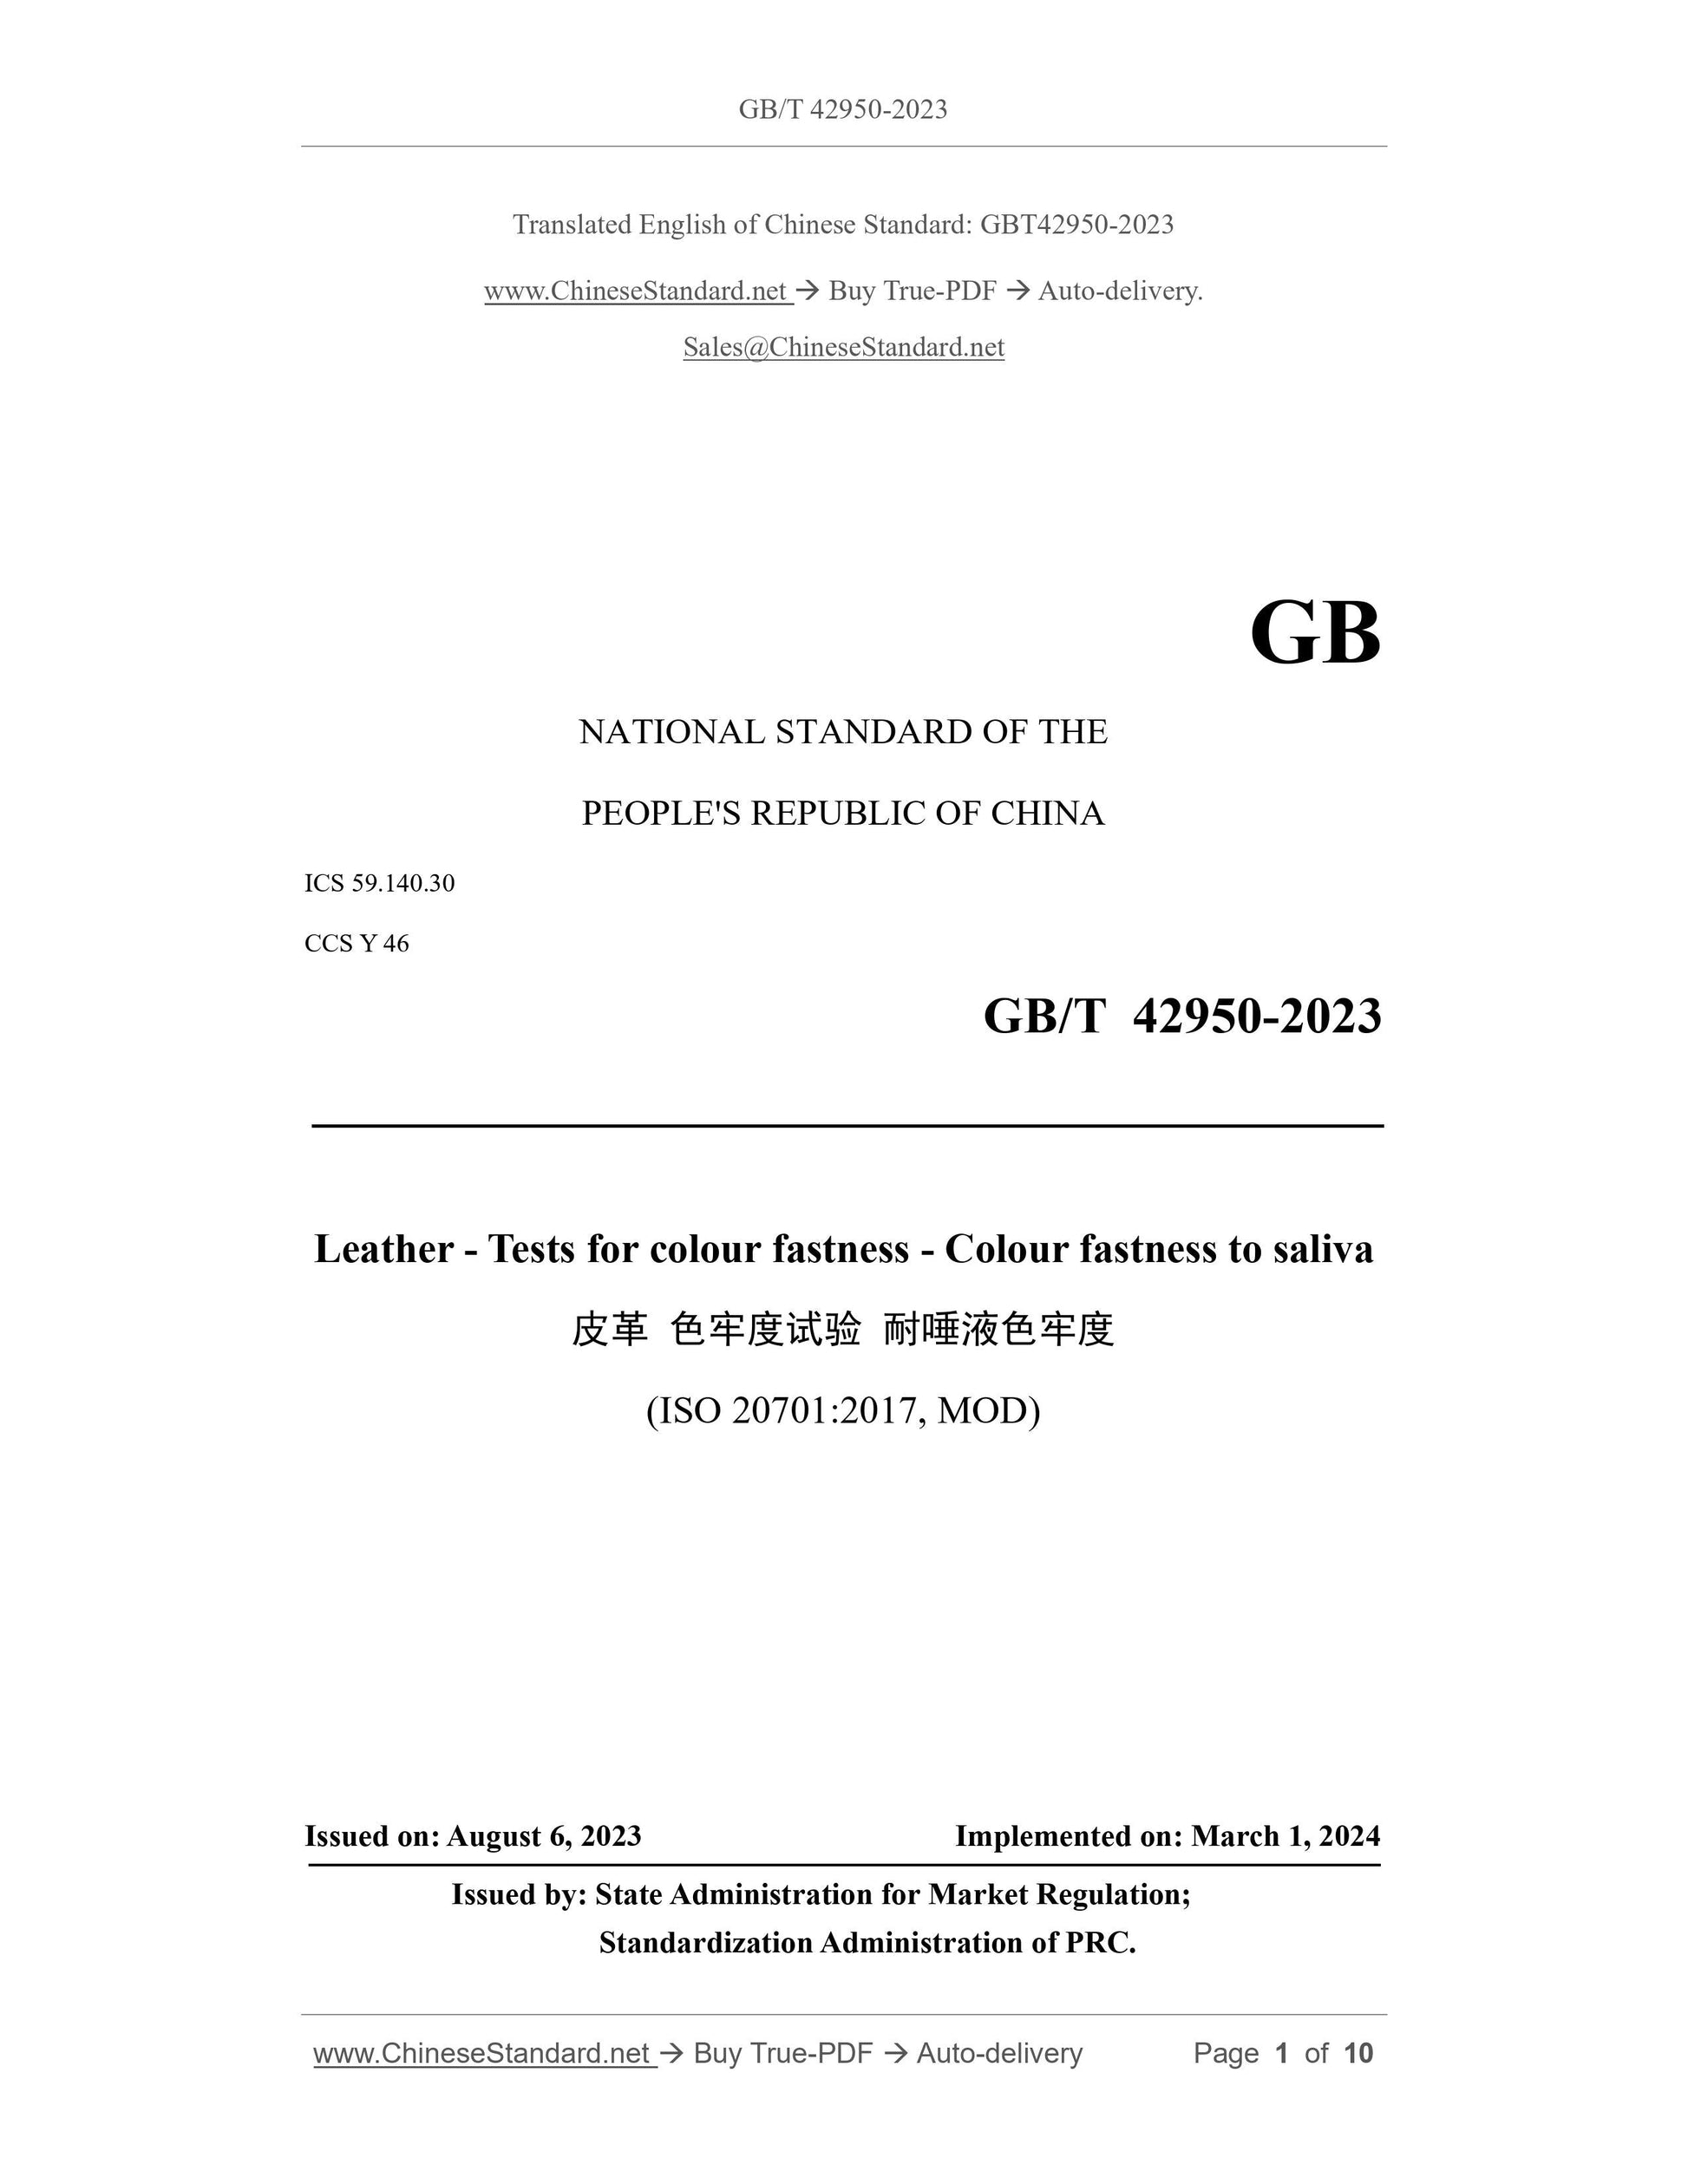 GB/T 42950-2023 Page 1